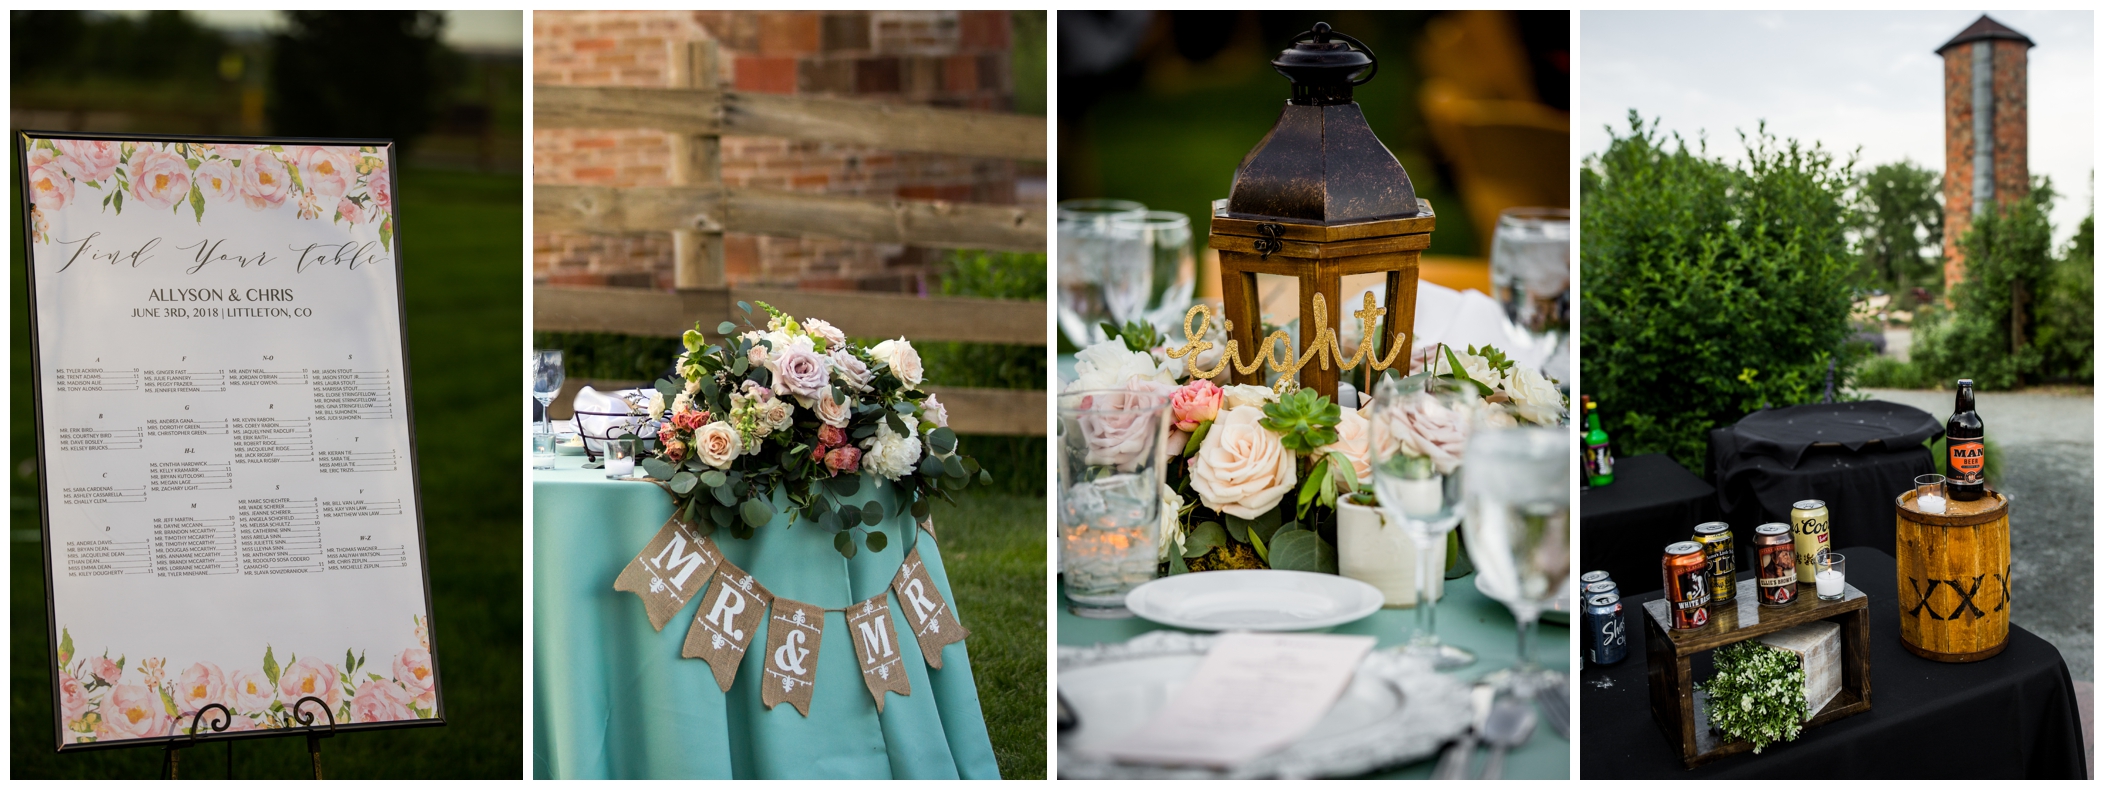 rustic reception details at Chatfield Farms wedding